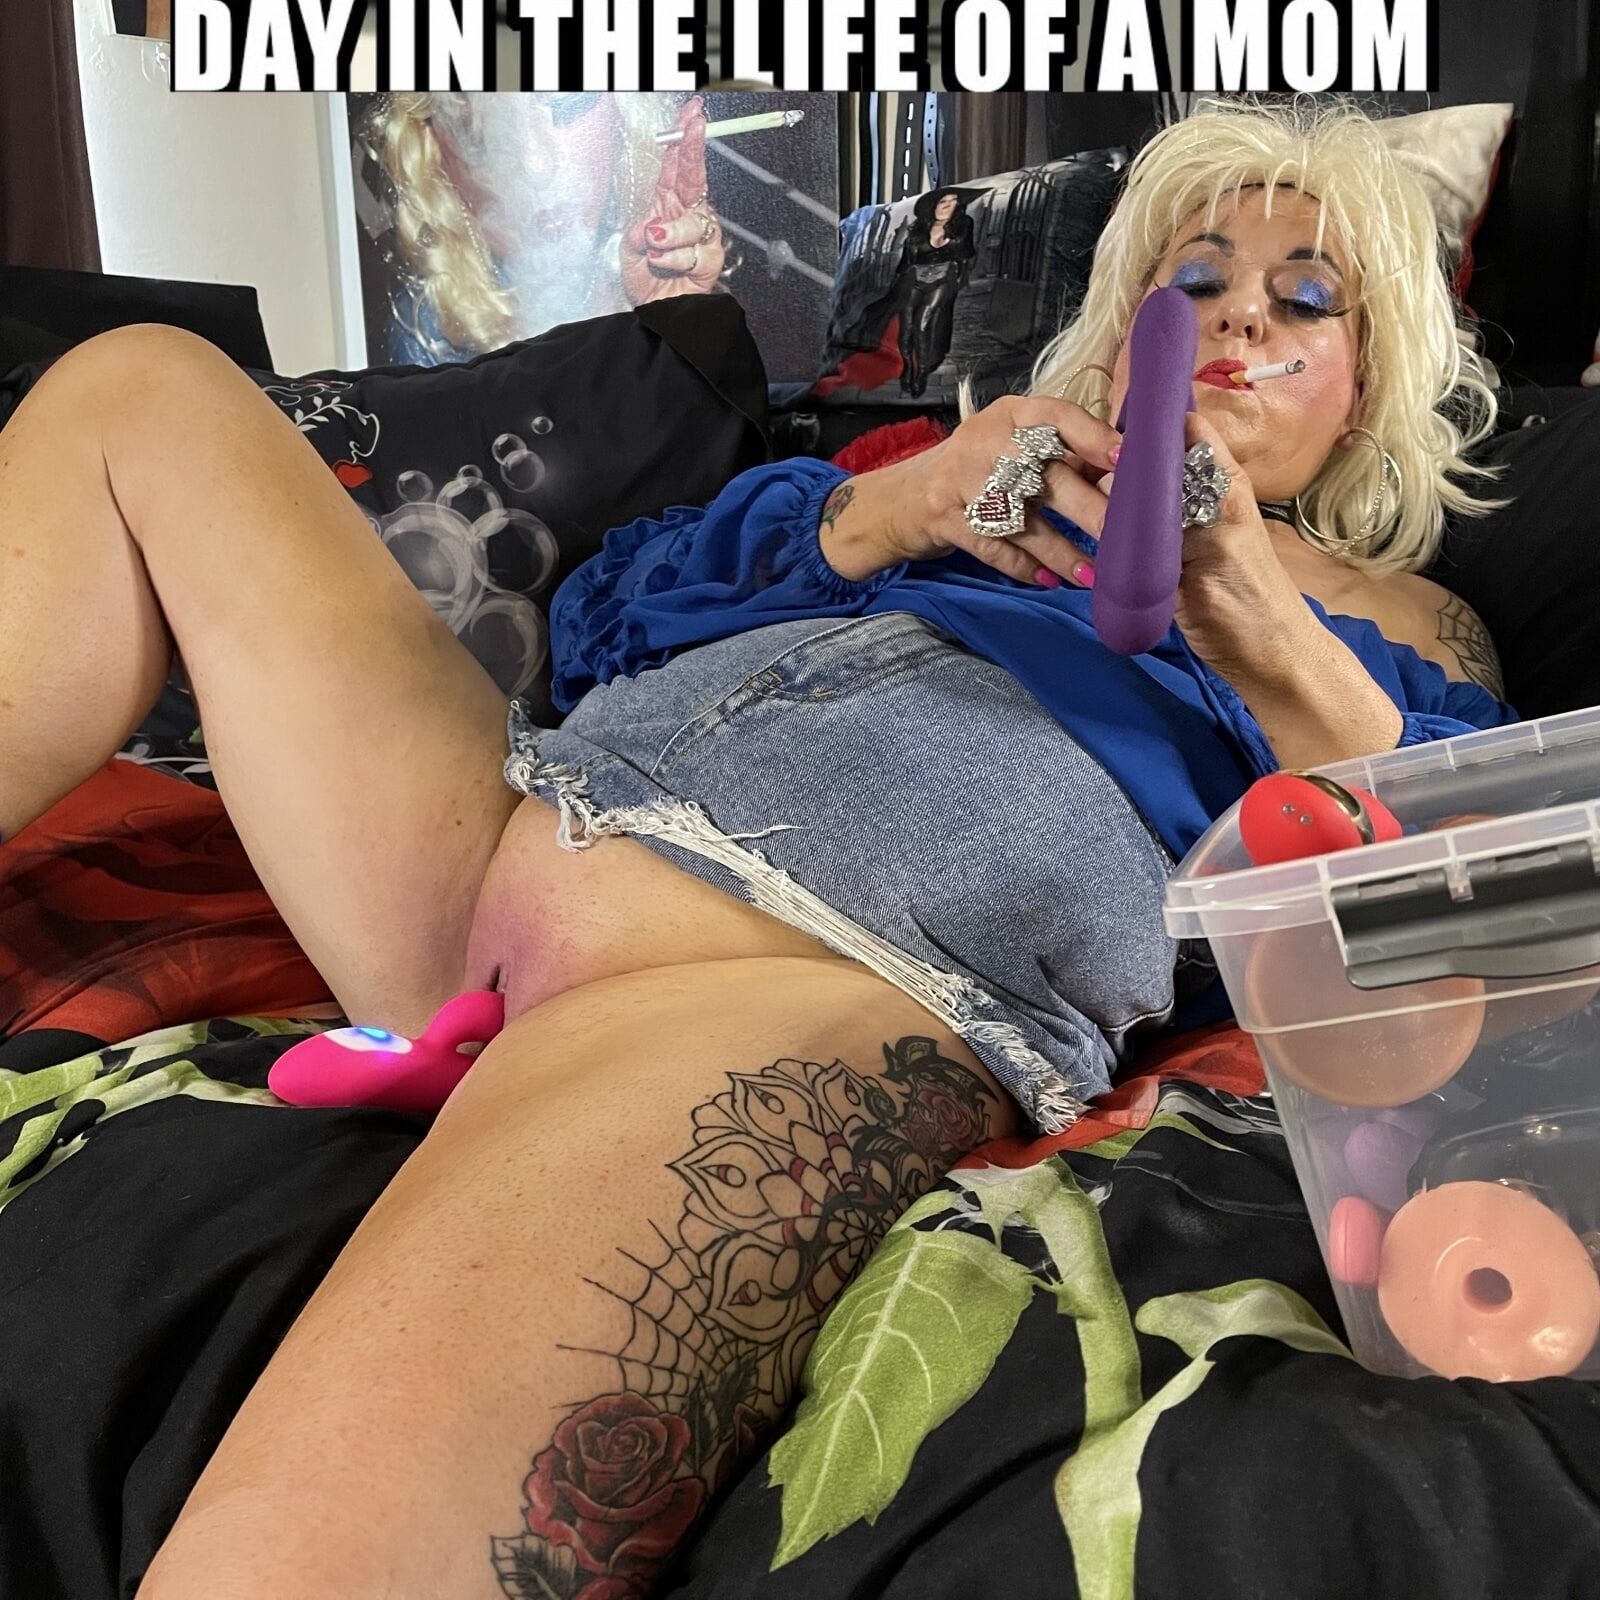 SHIRLEY THE LIFE OF A MOM #45